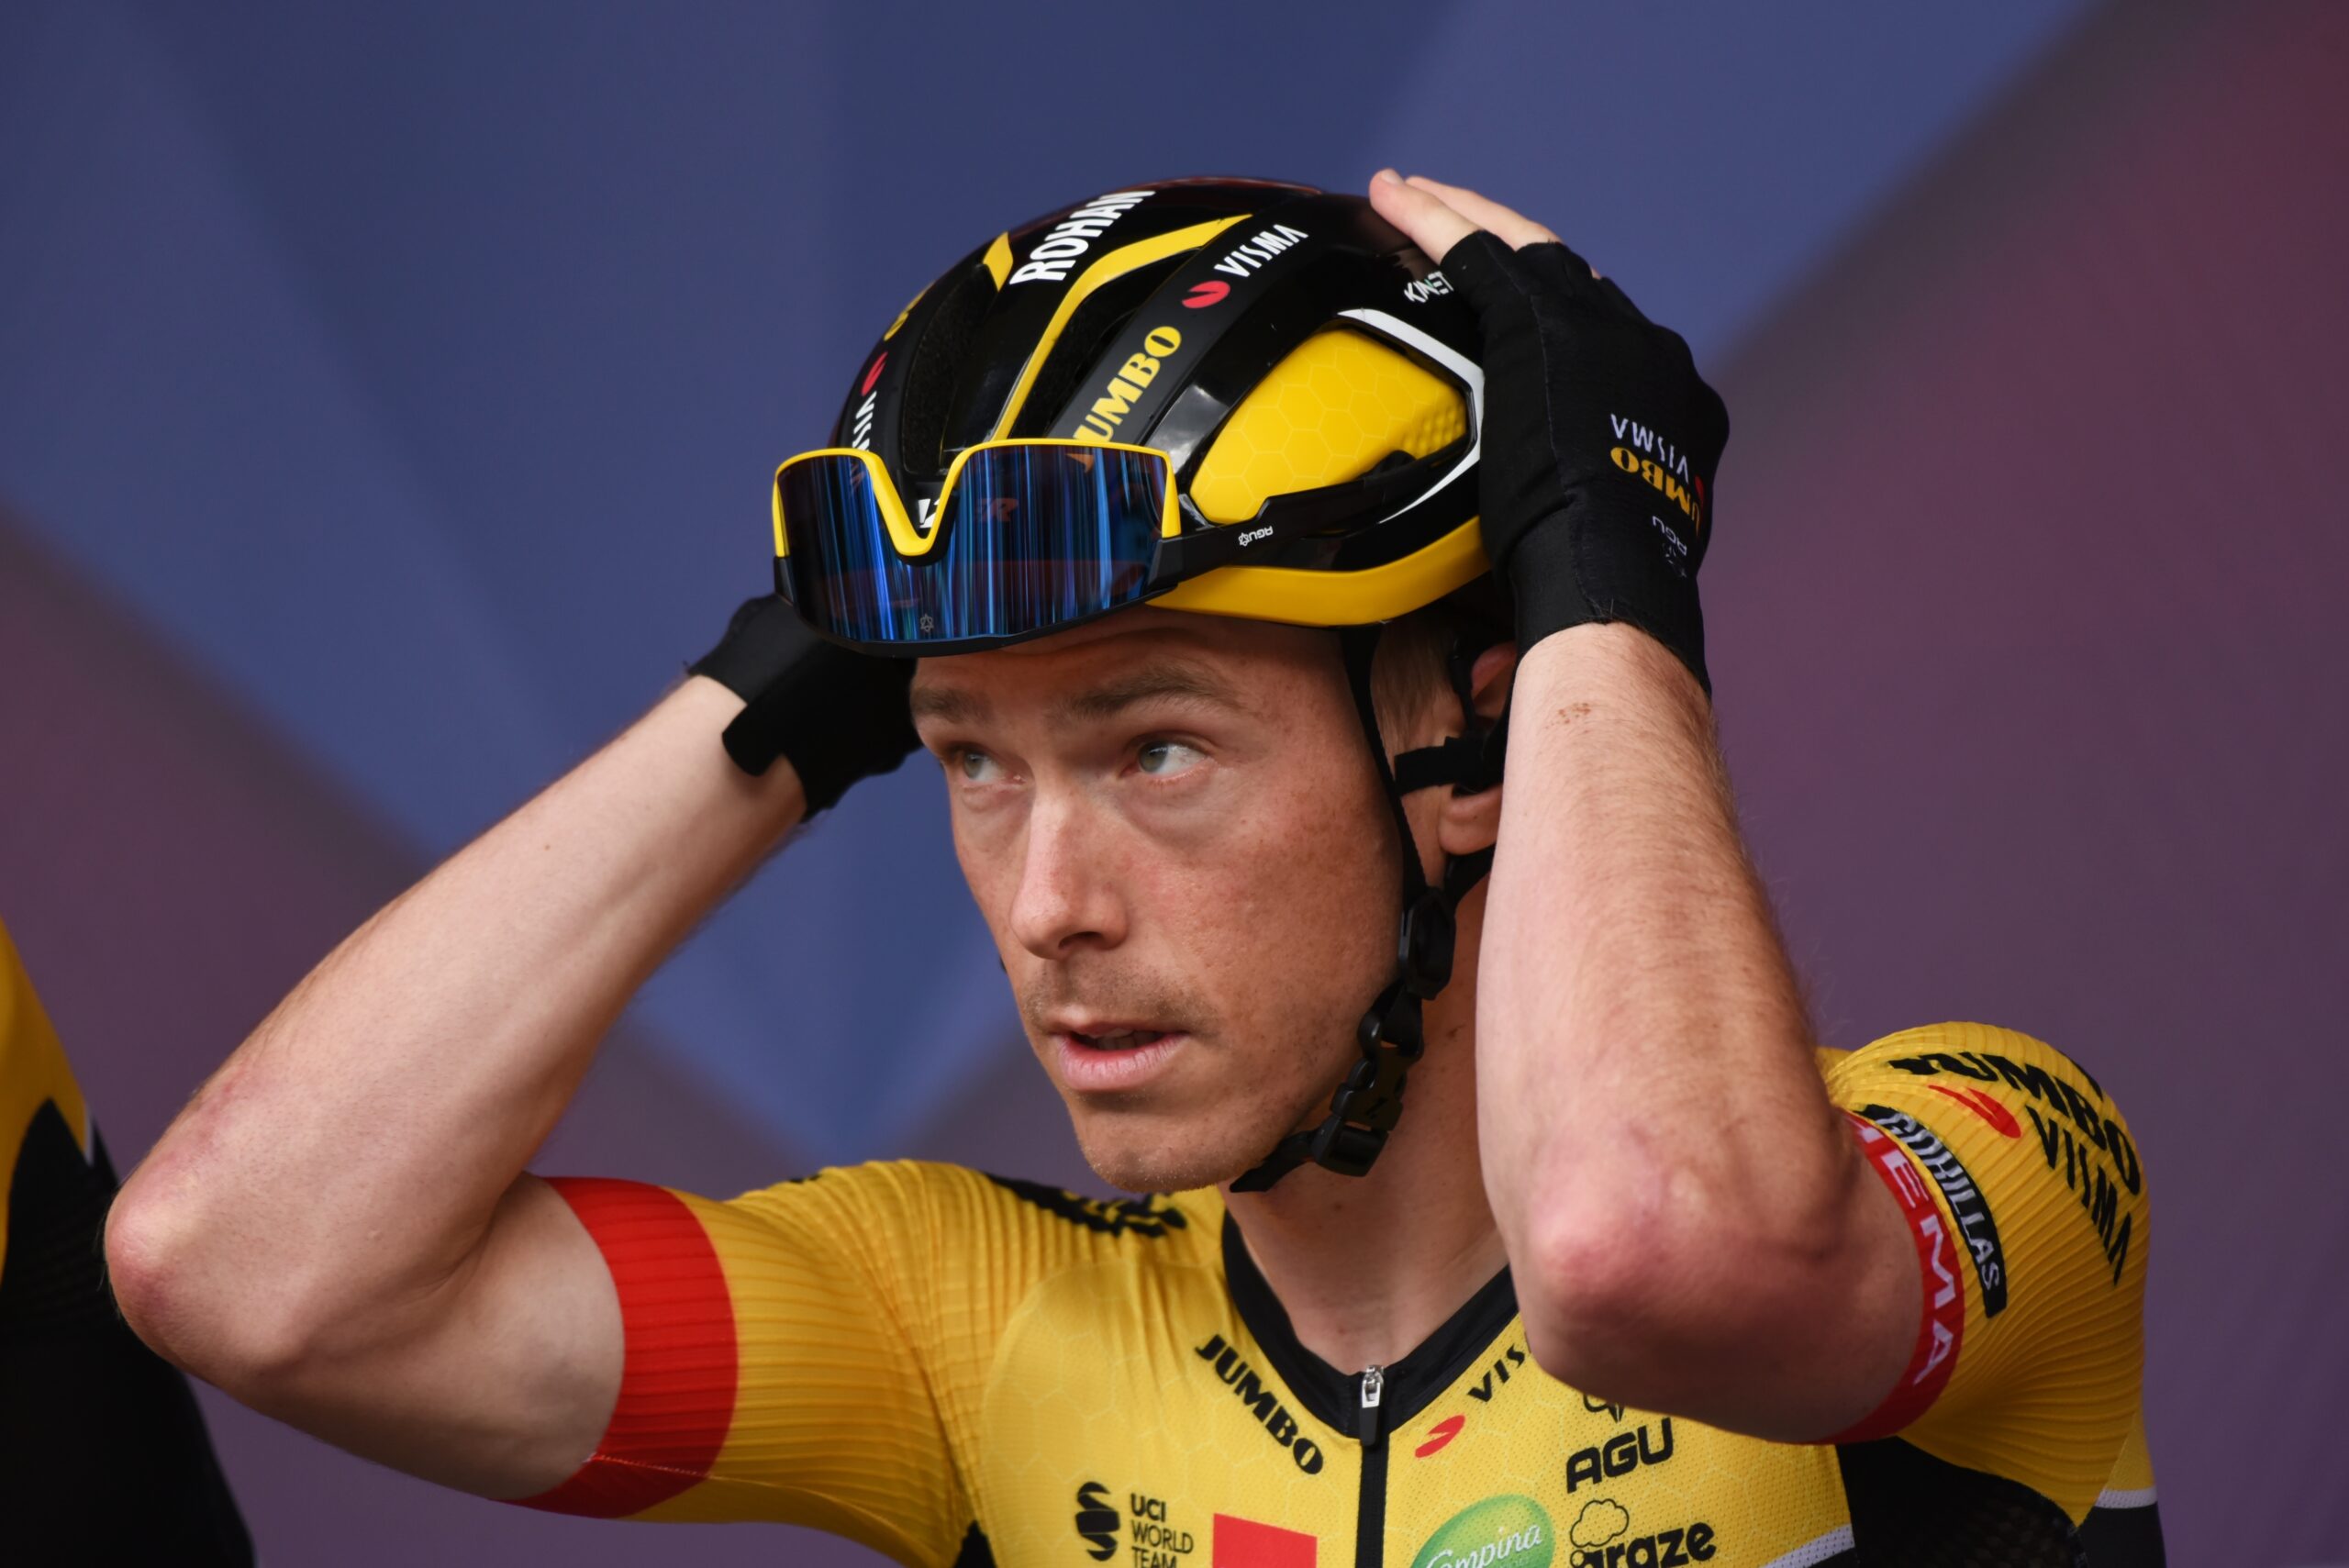 Rohan Dennis dropped from Tour Down Under role after wife’s death, charges